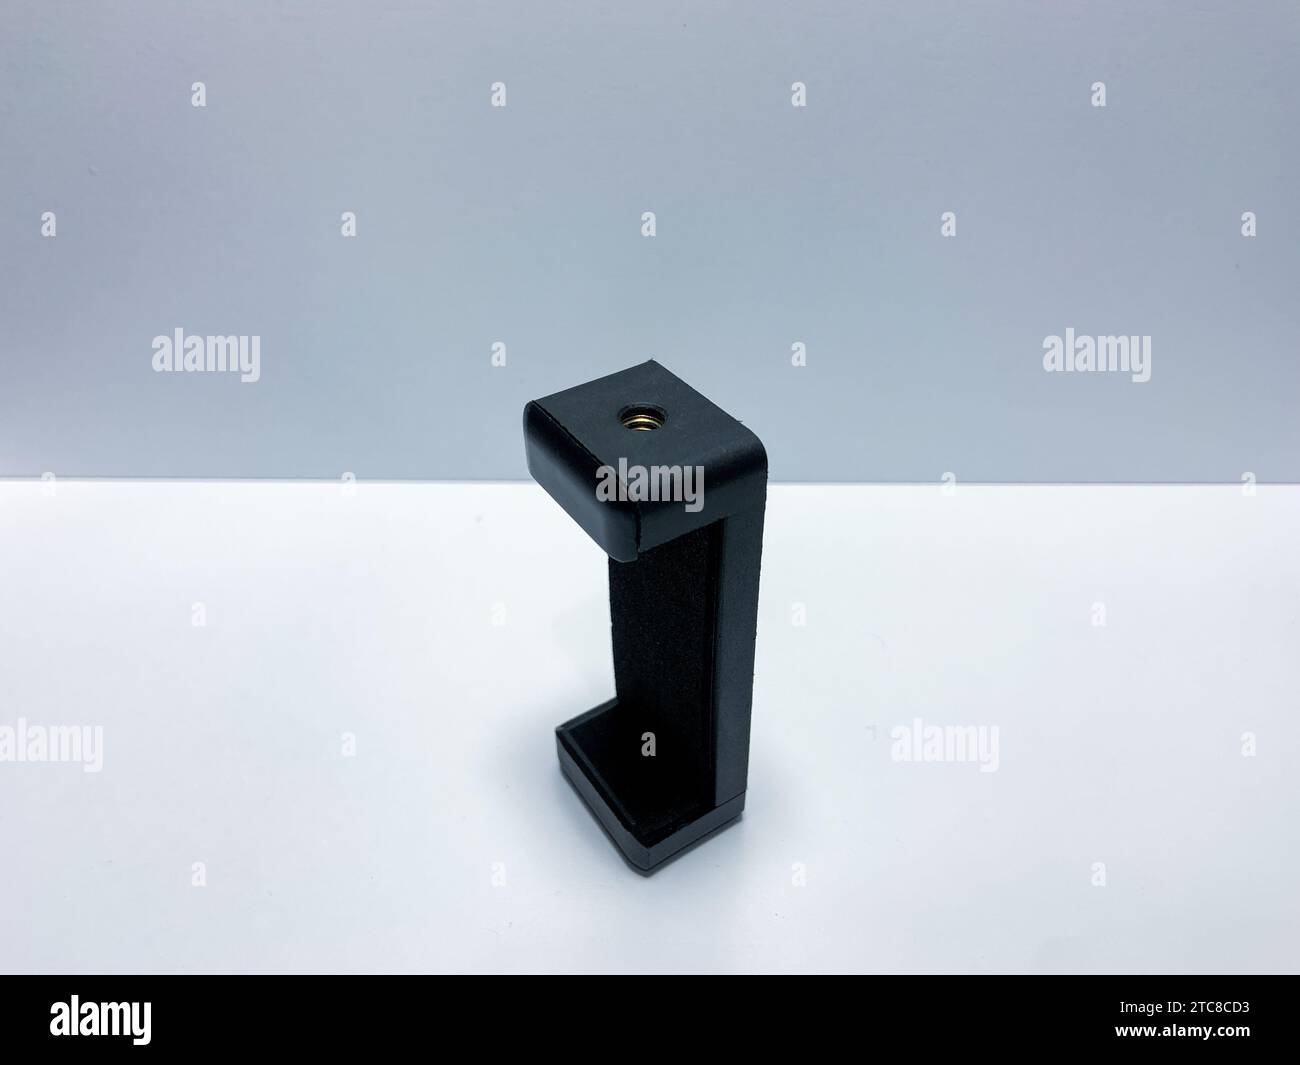 The phone holder is black on a white background Stock Photo